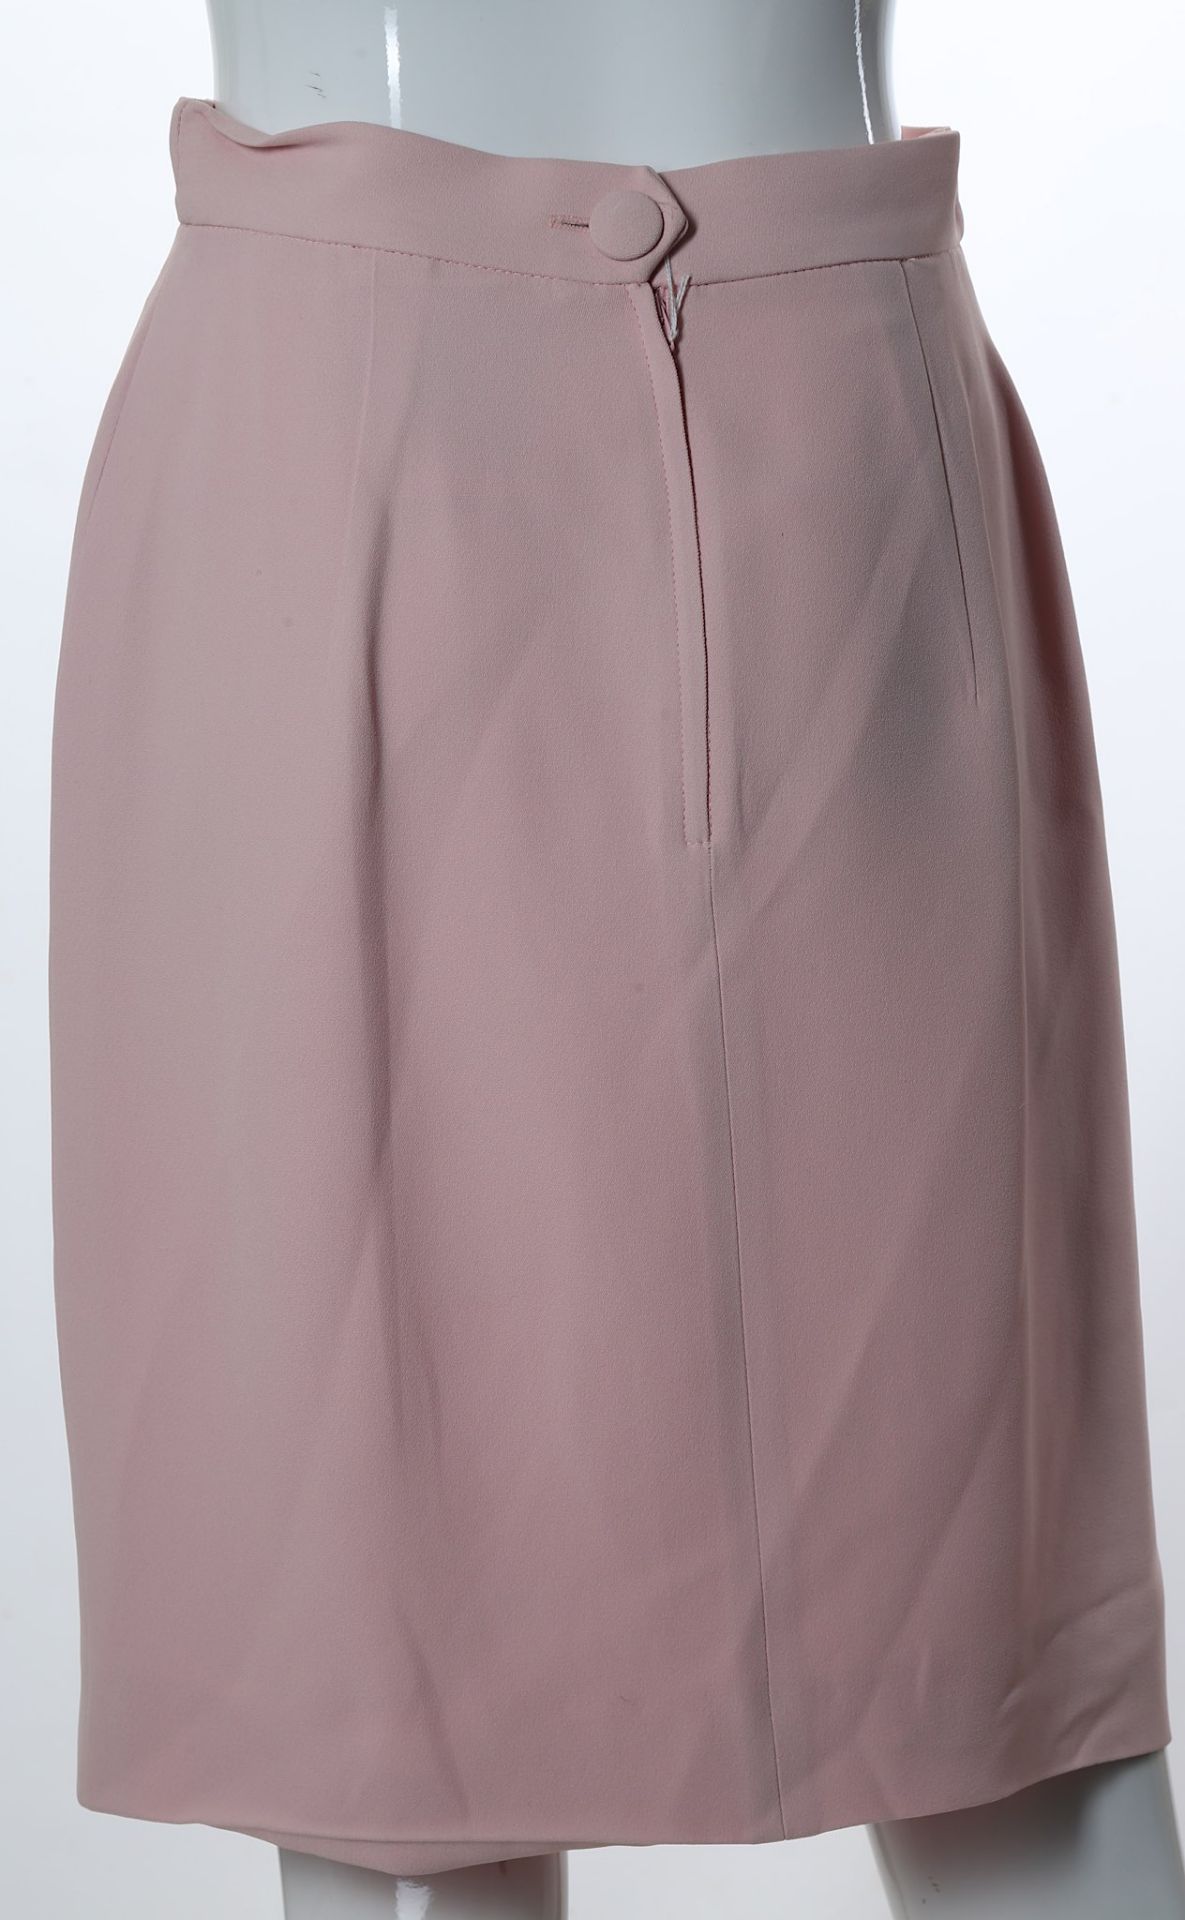 Moschino Cheap and Chic Pink Skirt Suit, 1990s, wi - Image 8 of 10